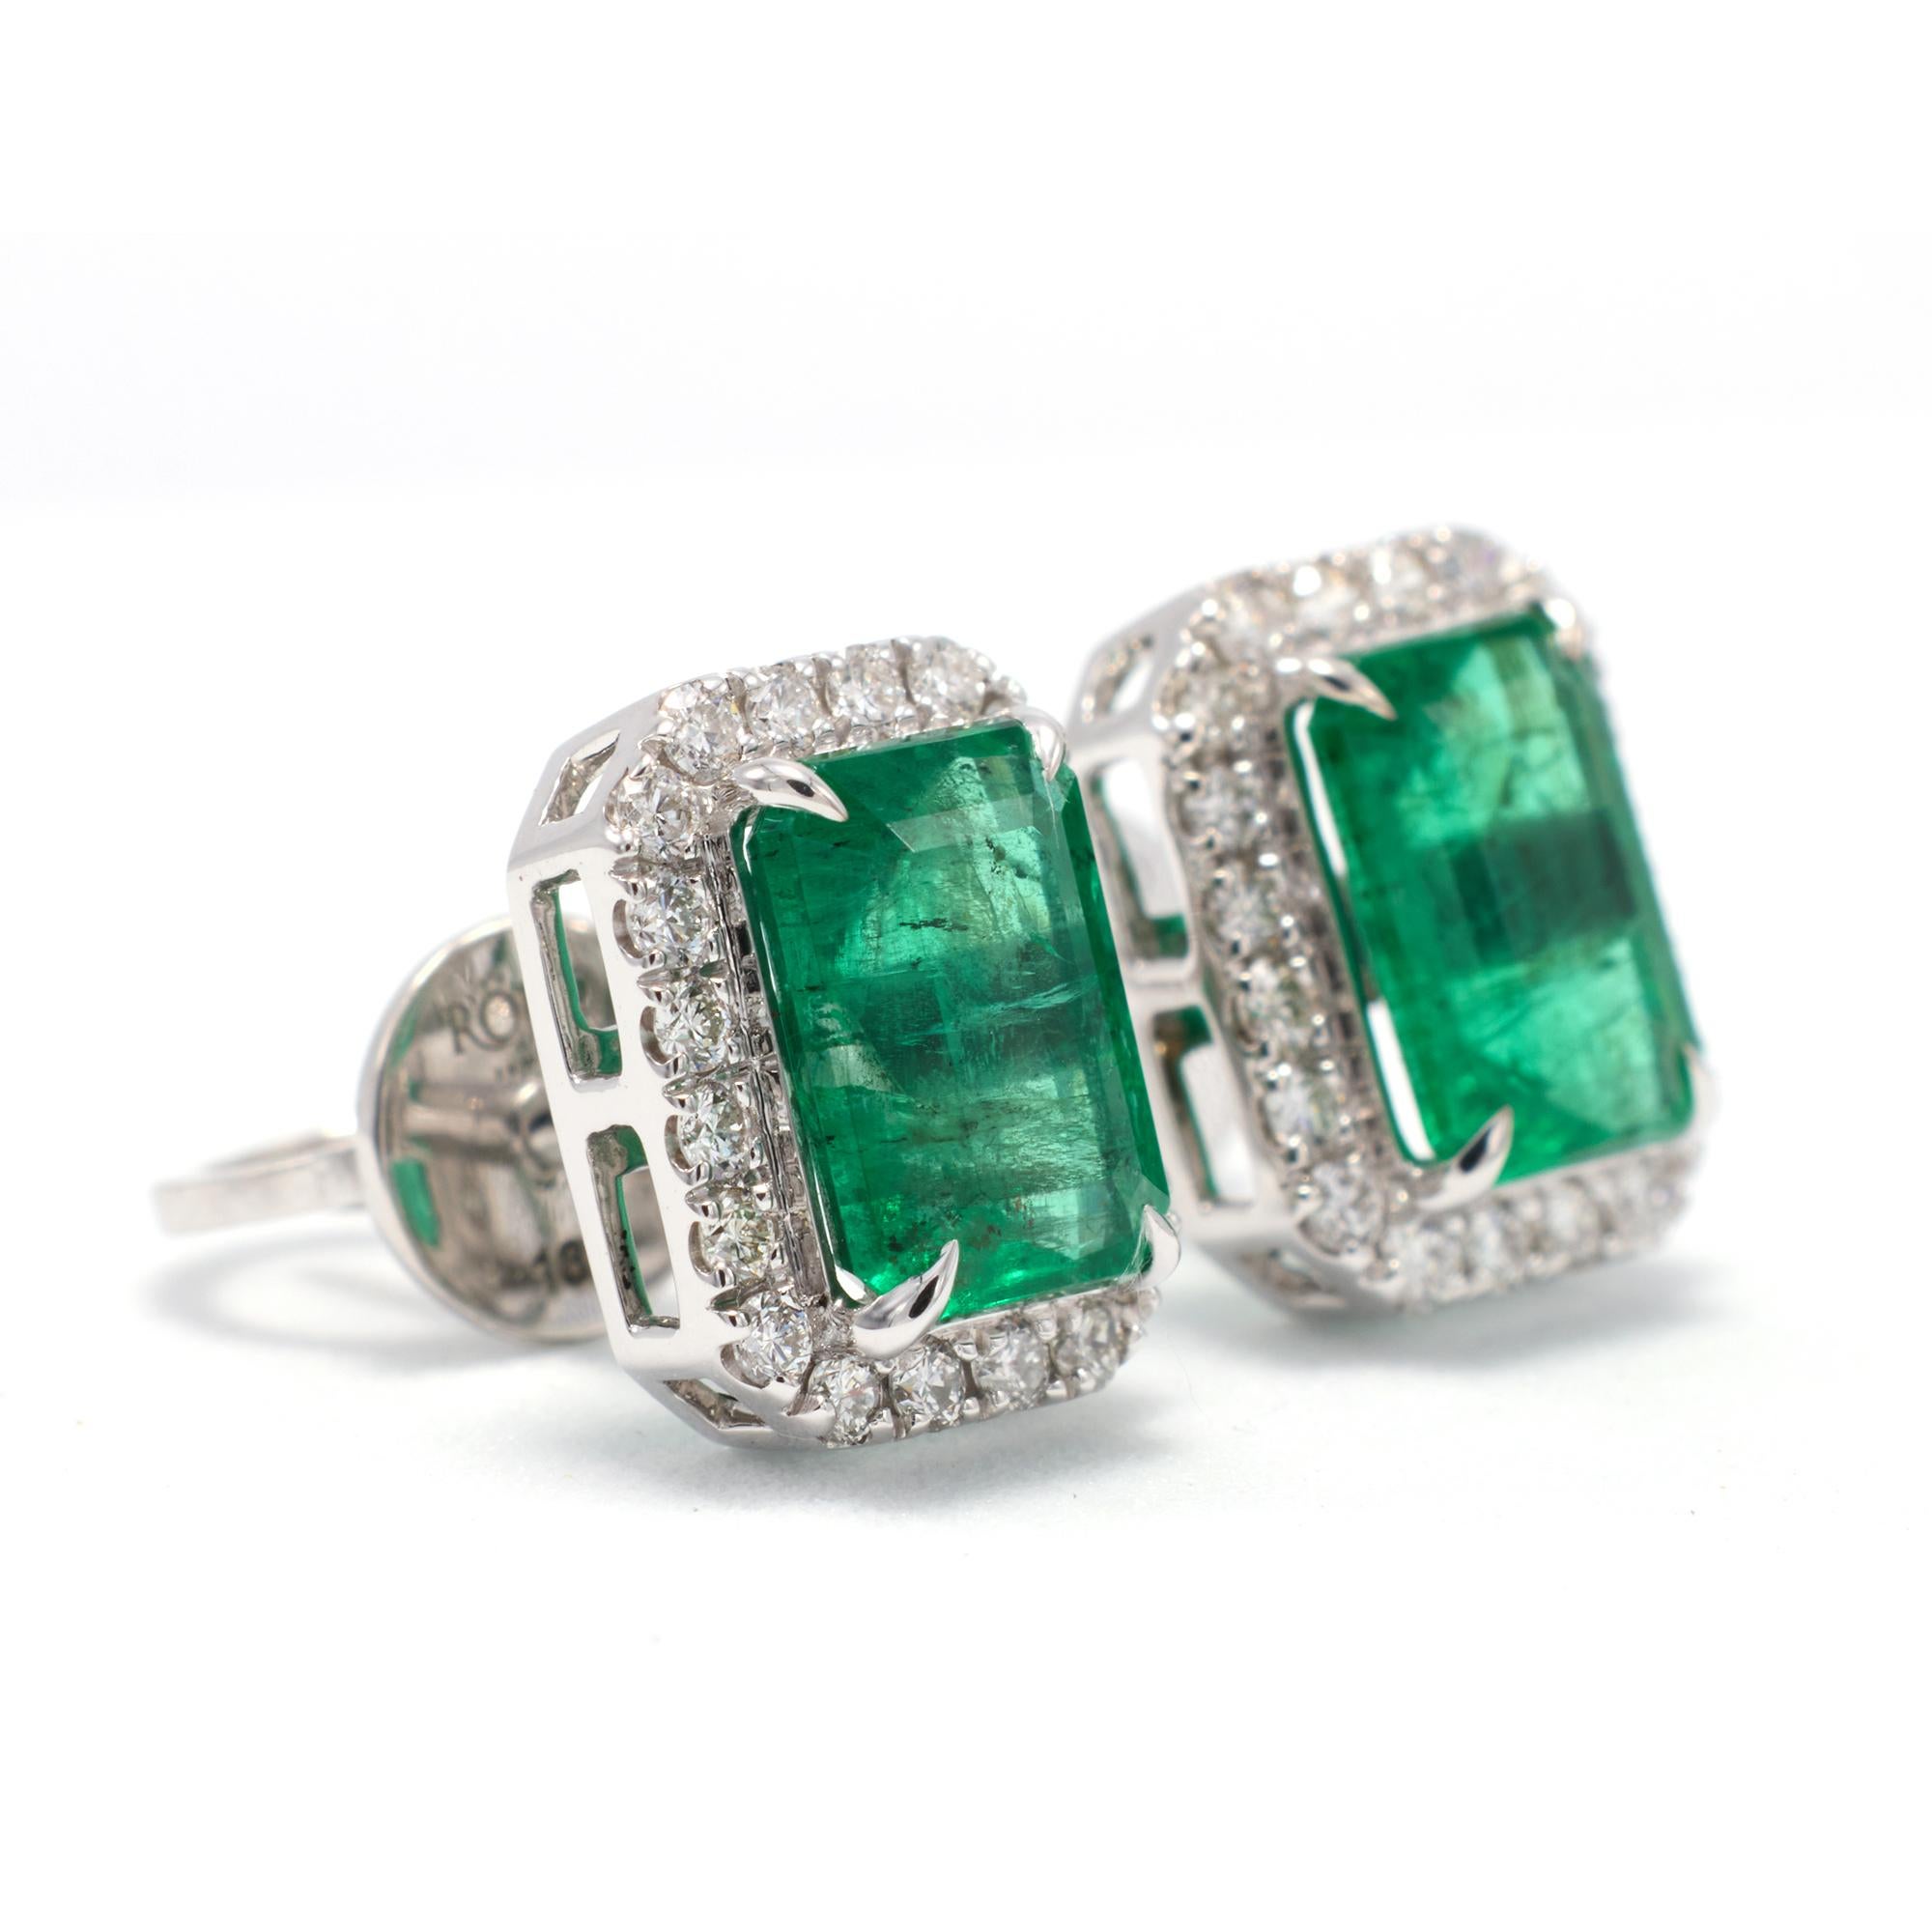 Emerald Octagons surrounded by dazzling VS diamonds set in 18k white gold

Attention all jewelry lovers! Introducing a stunning pair of stud earrings that will take your breath away. These 18k white gold studs feature vibrant emerald octagons,